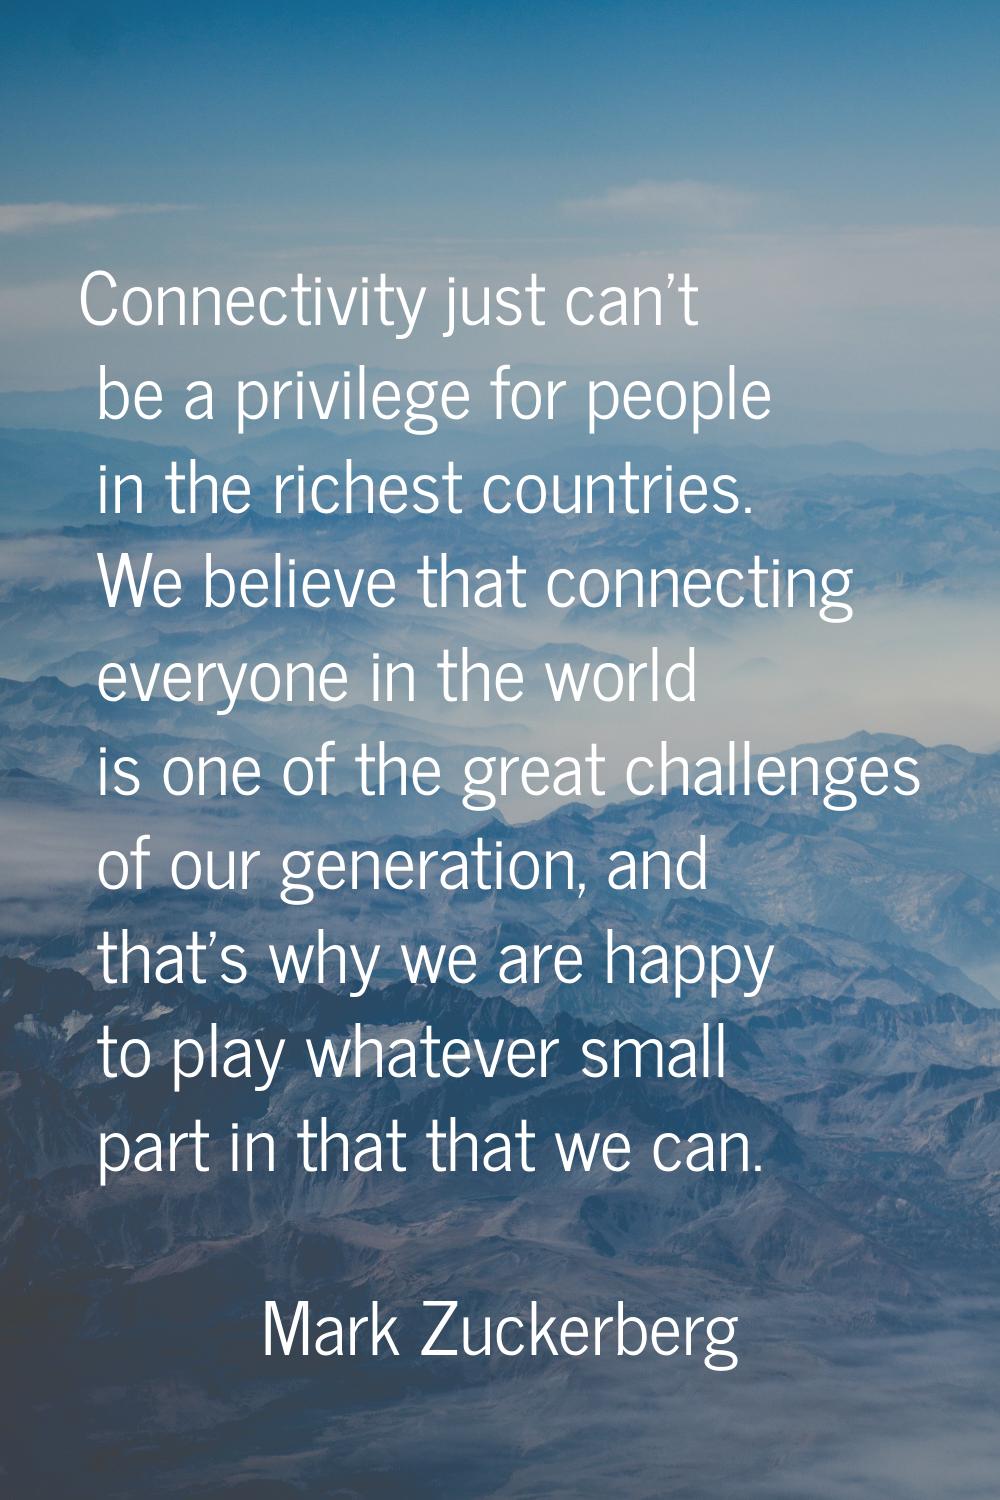 Connectivity just can't be a privilege for people in the richest countries. We believe that connect